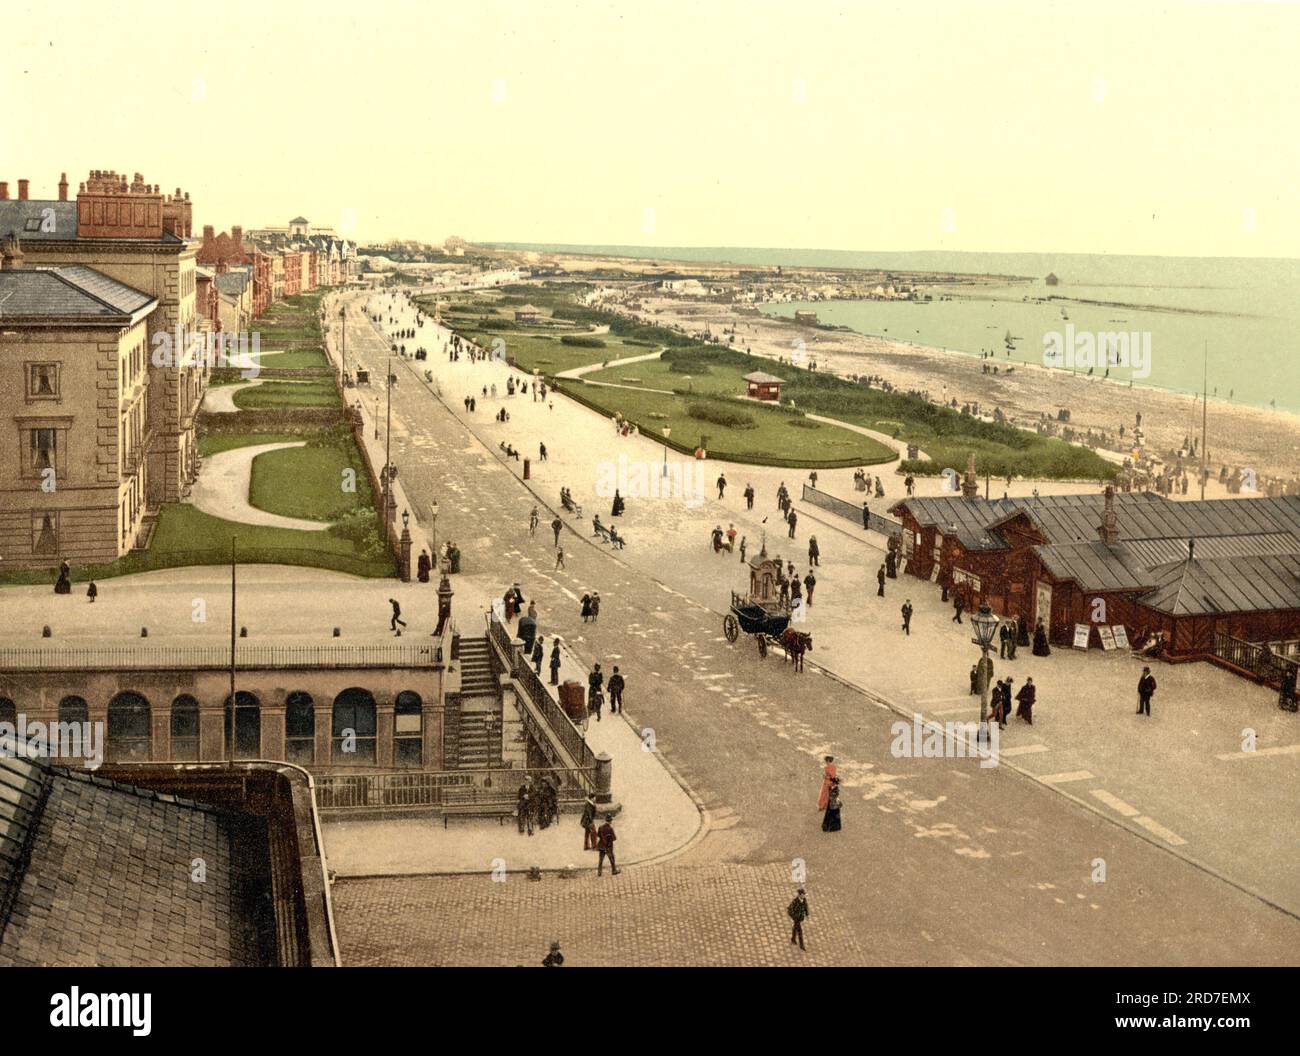 The promenade and lakes, Southport, a seaside town in the Metropolitan Borough of Sefton in Merseyside, England, 1895, Historical, digital improved reproduction of an old Photochrome print Stock Photo